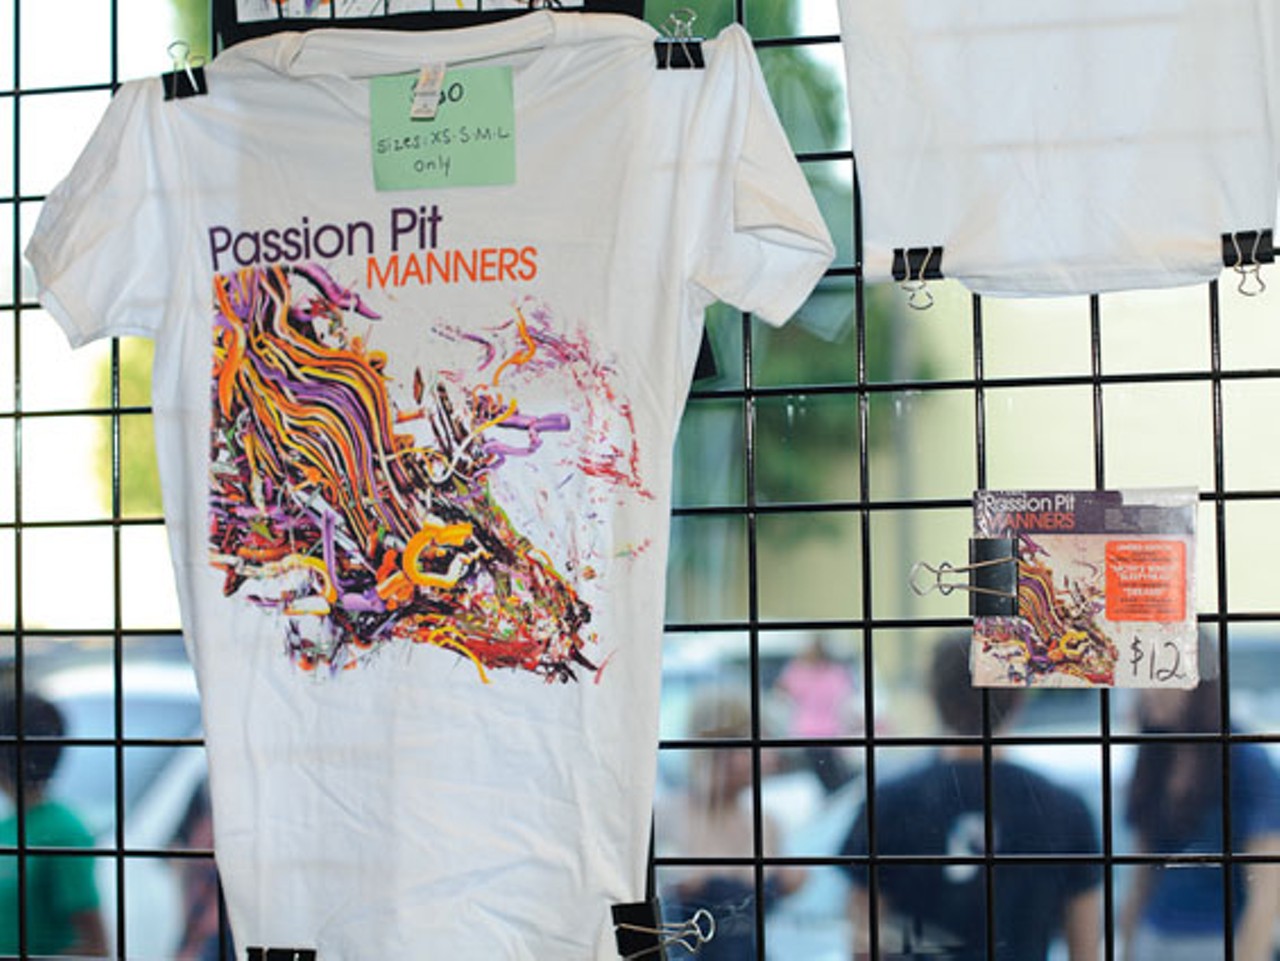 Passion Pit merchandise for sale in Suite 100.